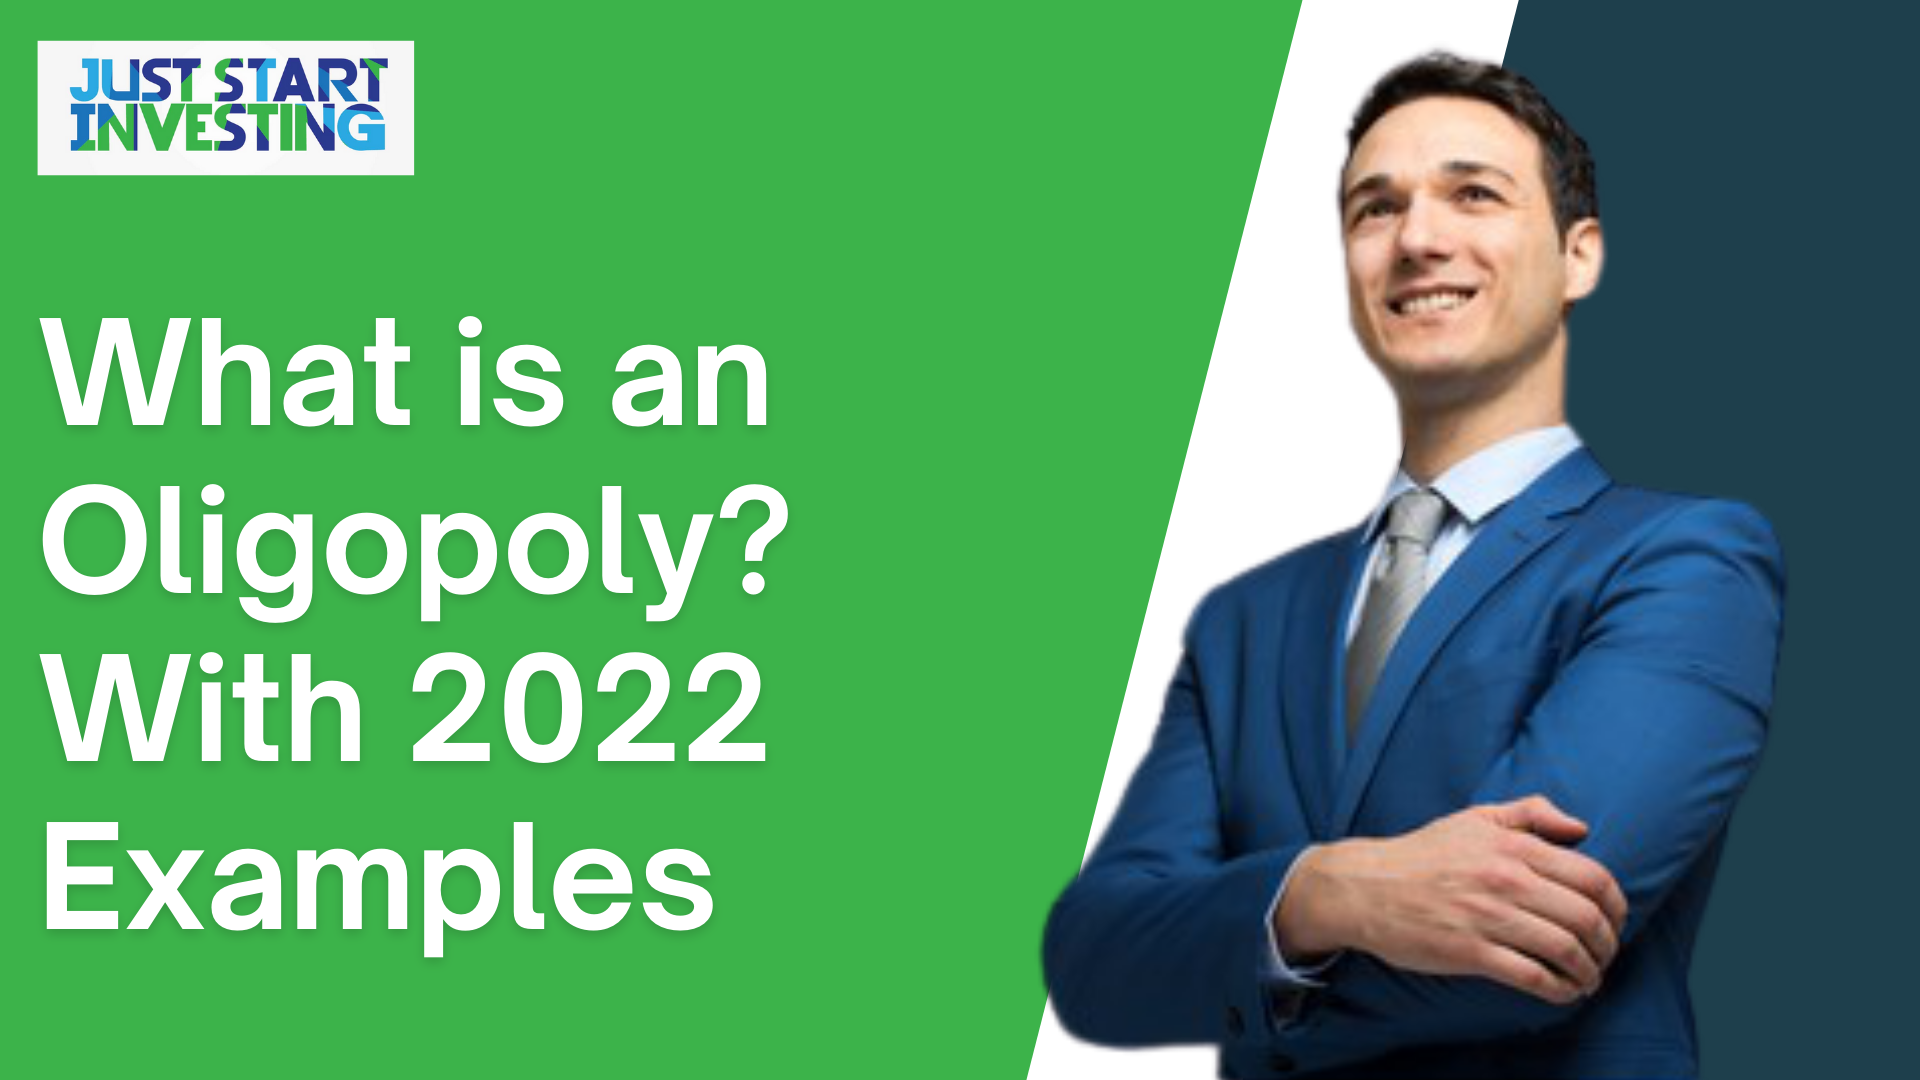 What is an Oligopoly? With 2022 Examples